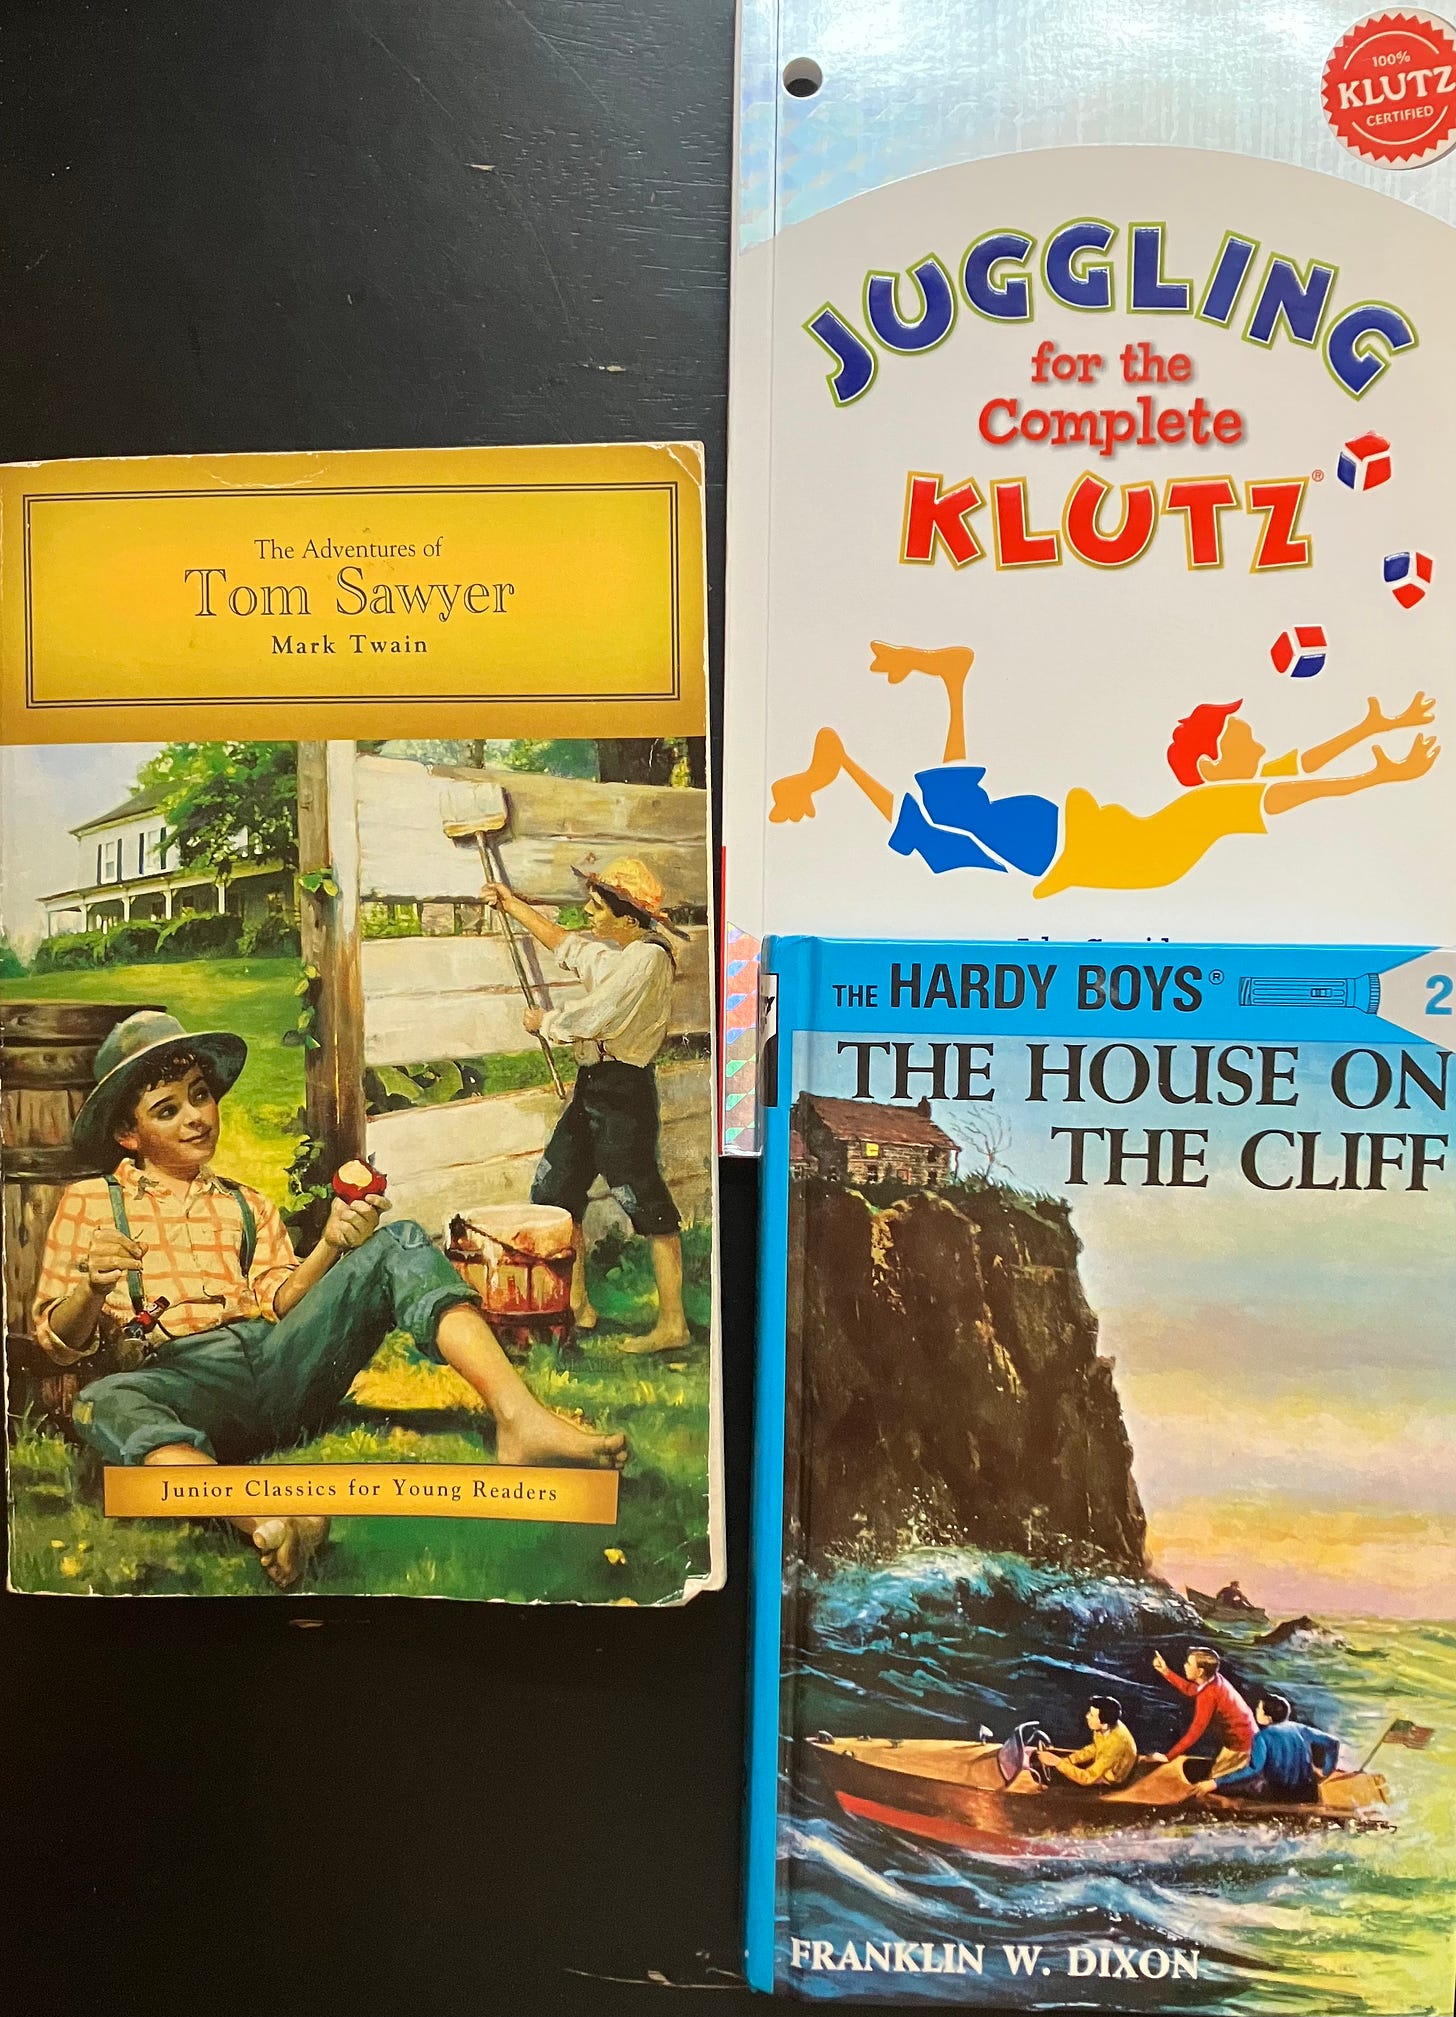 Tom Sawyer, Mark Twain, Juggling for the Complete KLUTZ, and Hardy Boys, The House on the Cliff